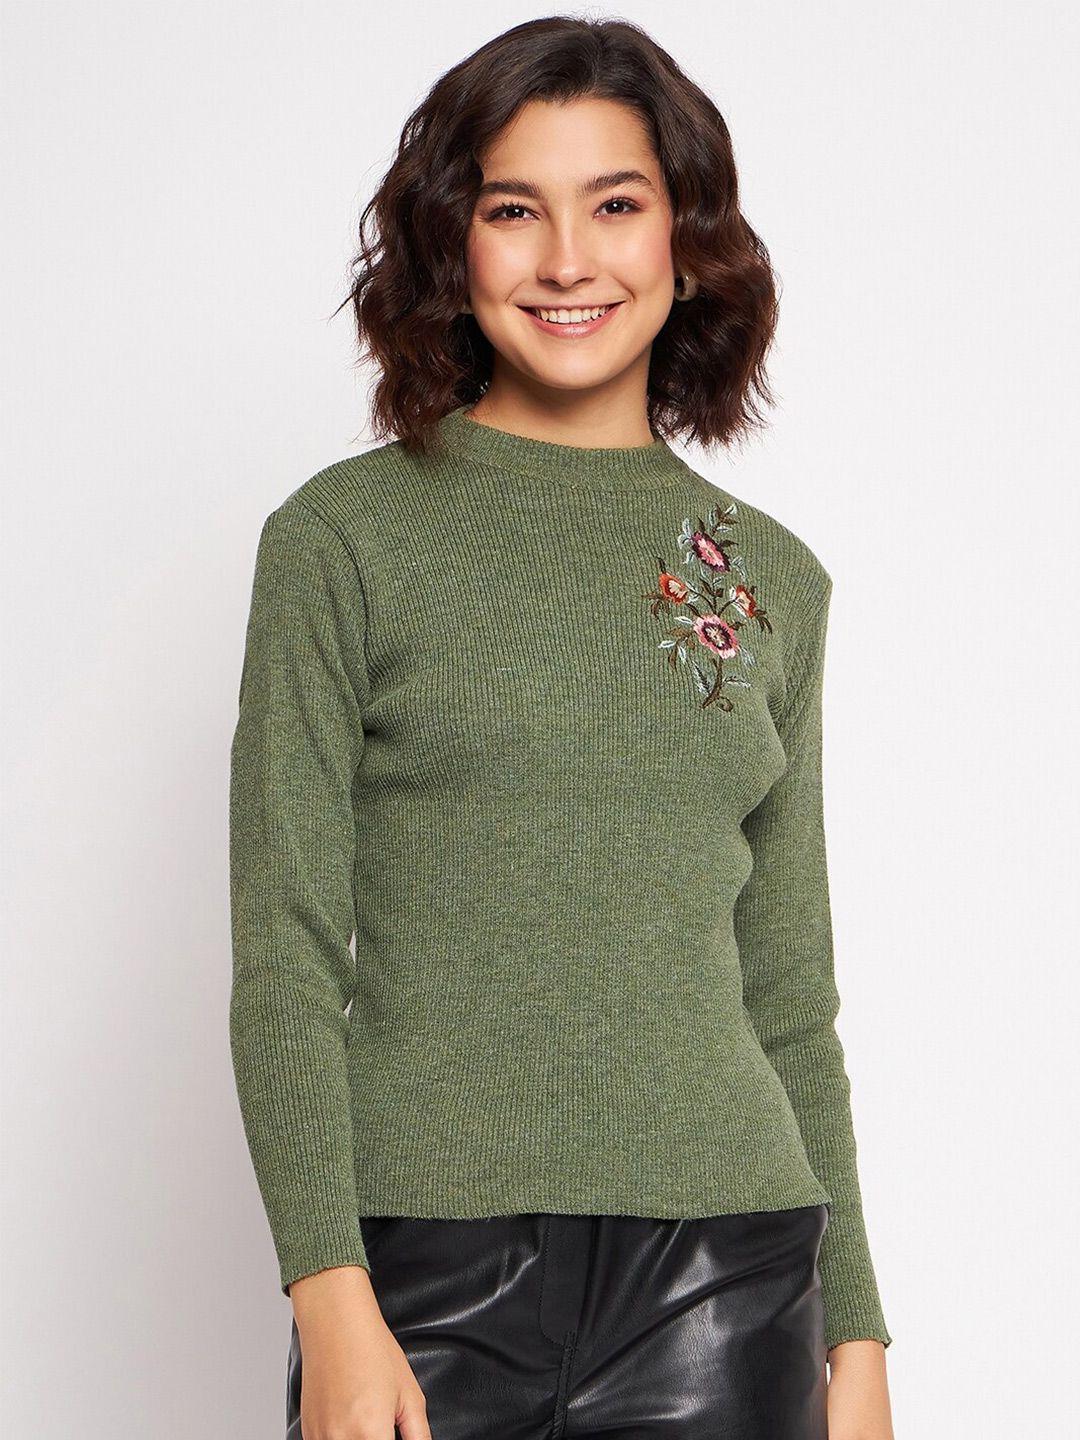 clapton-ribbed-floral-embroidered-mock-collar-pullover-sweater